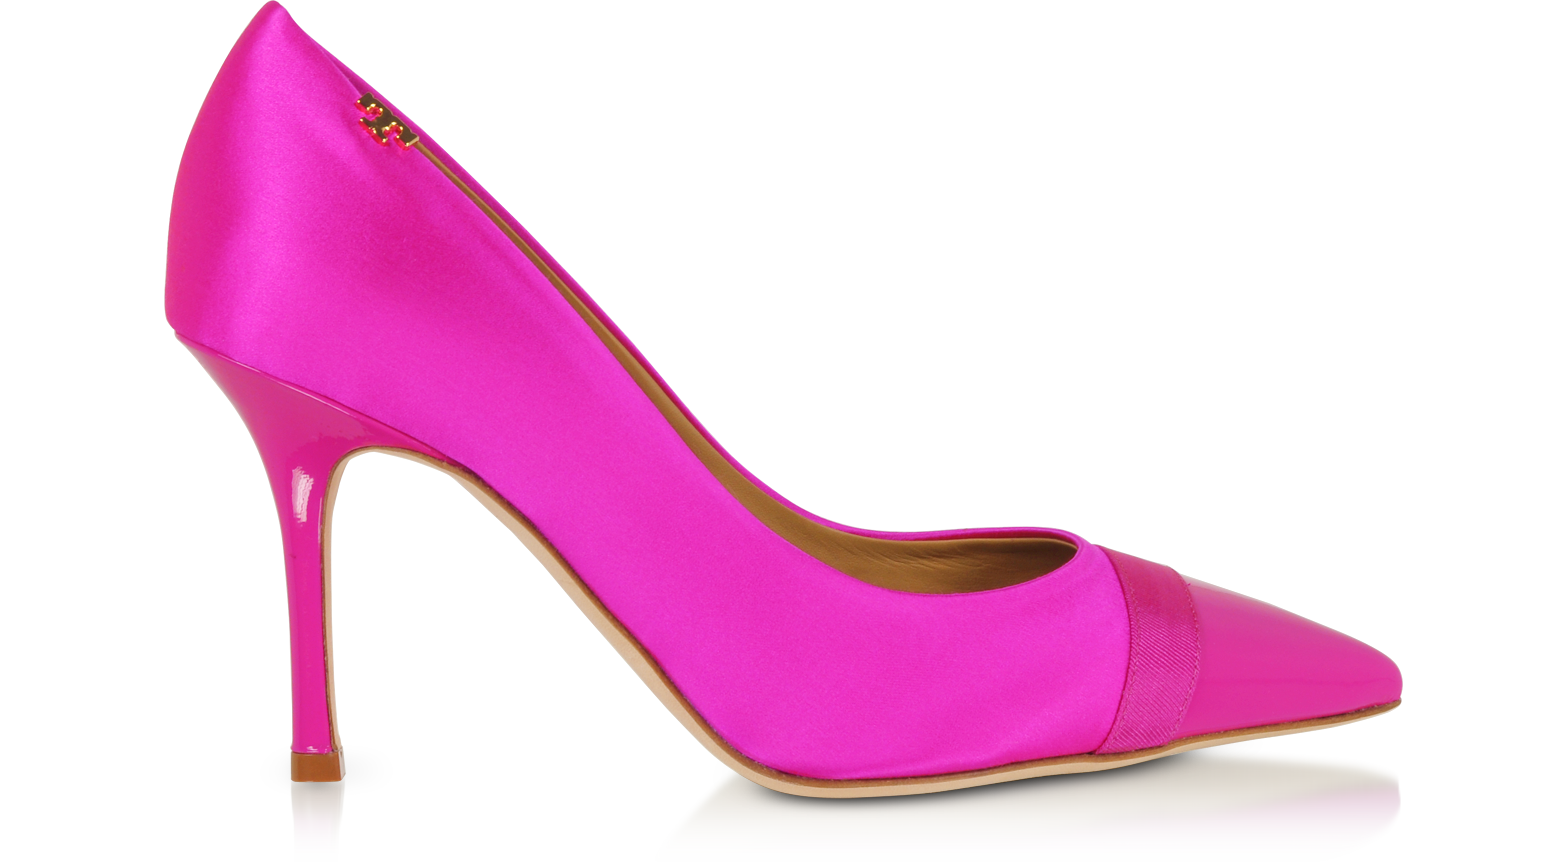 Tory Burch Imperial Pink Penelope 85MM Cap-Toe Pumps 5 US at FORZIERI